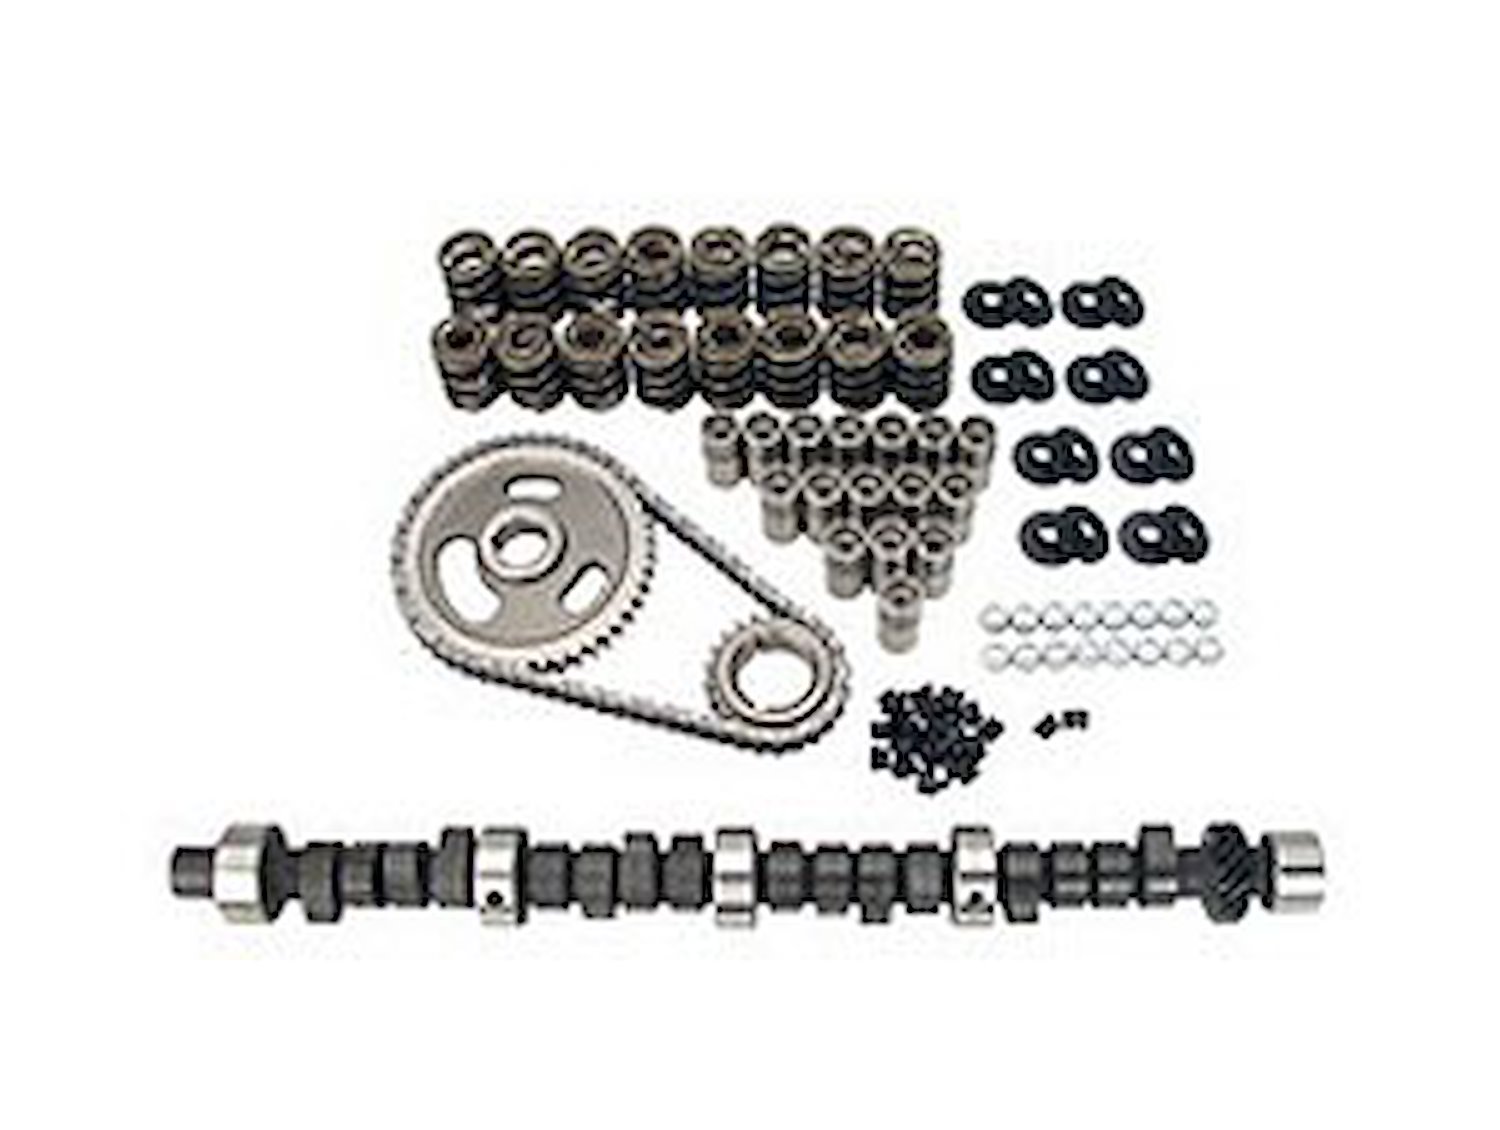 Thumpr Hydraulic Flat Tappet Camshaft Complete Kit Lift